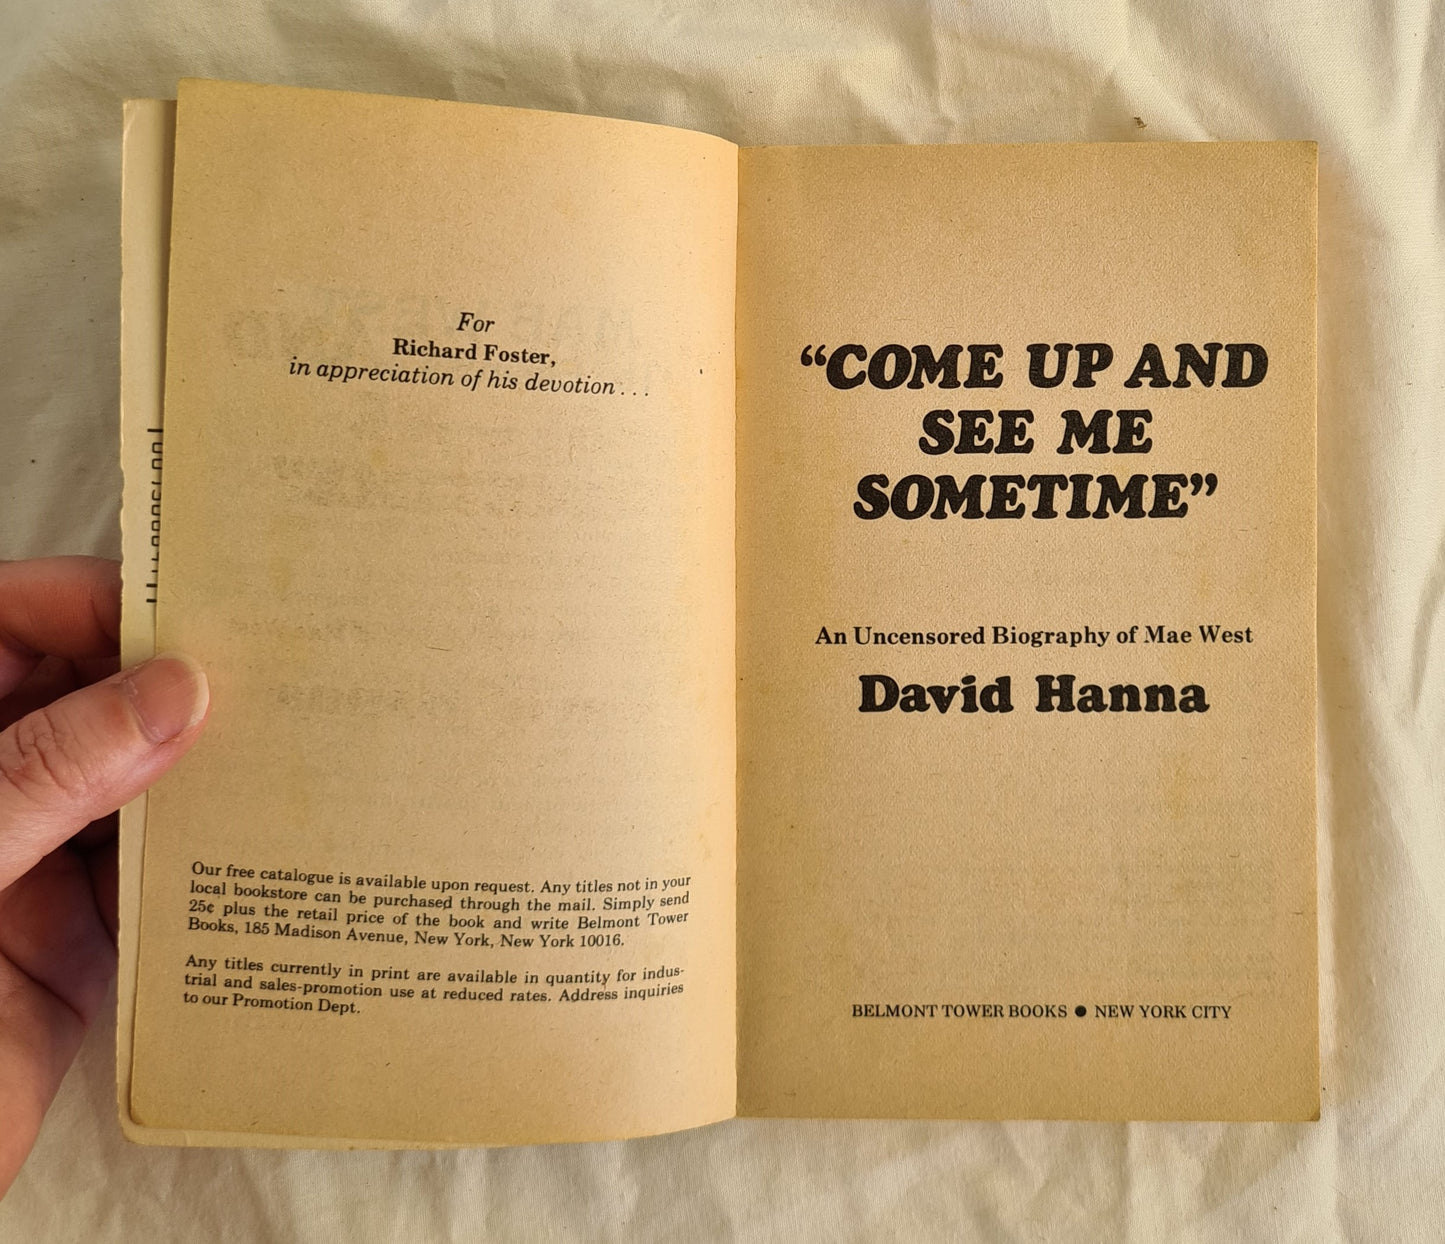 “Come Up and See Me Sometime” by David Hanna